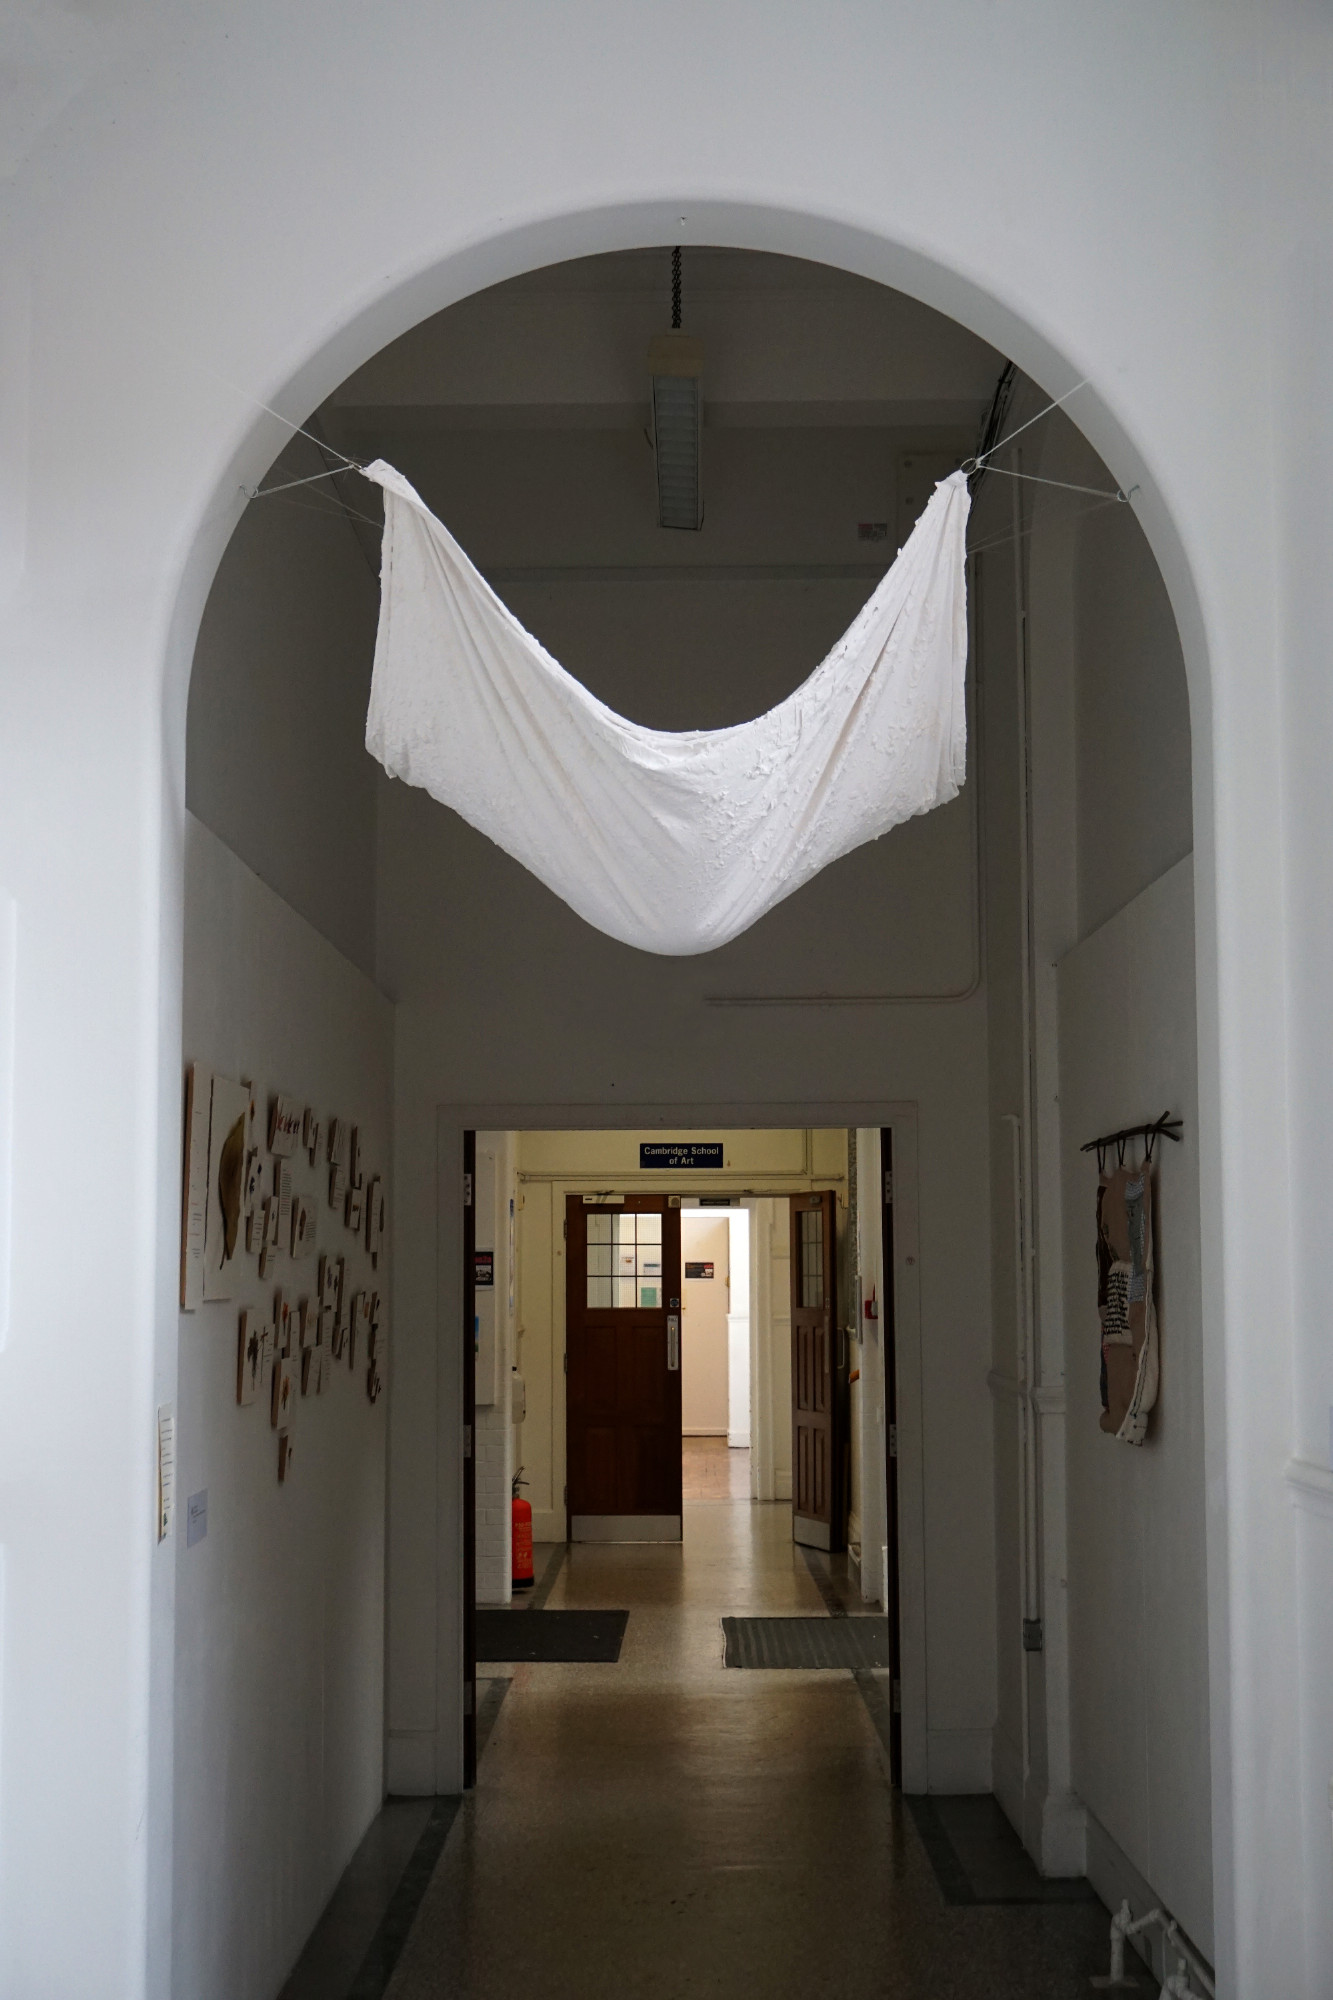 CREEPING UP ON ME - Plaster, bed sheet, Freeform. 2023